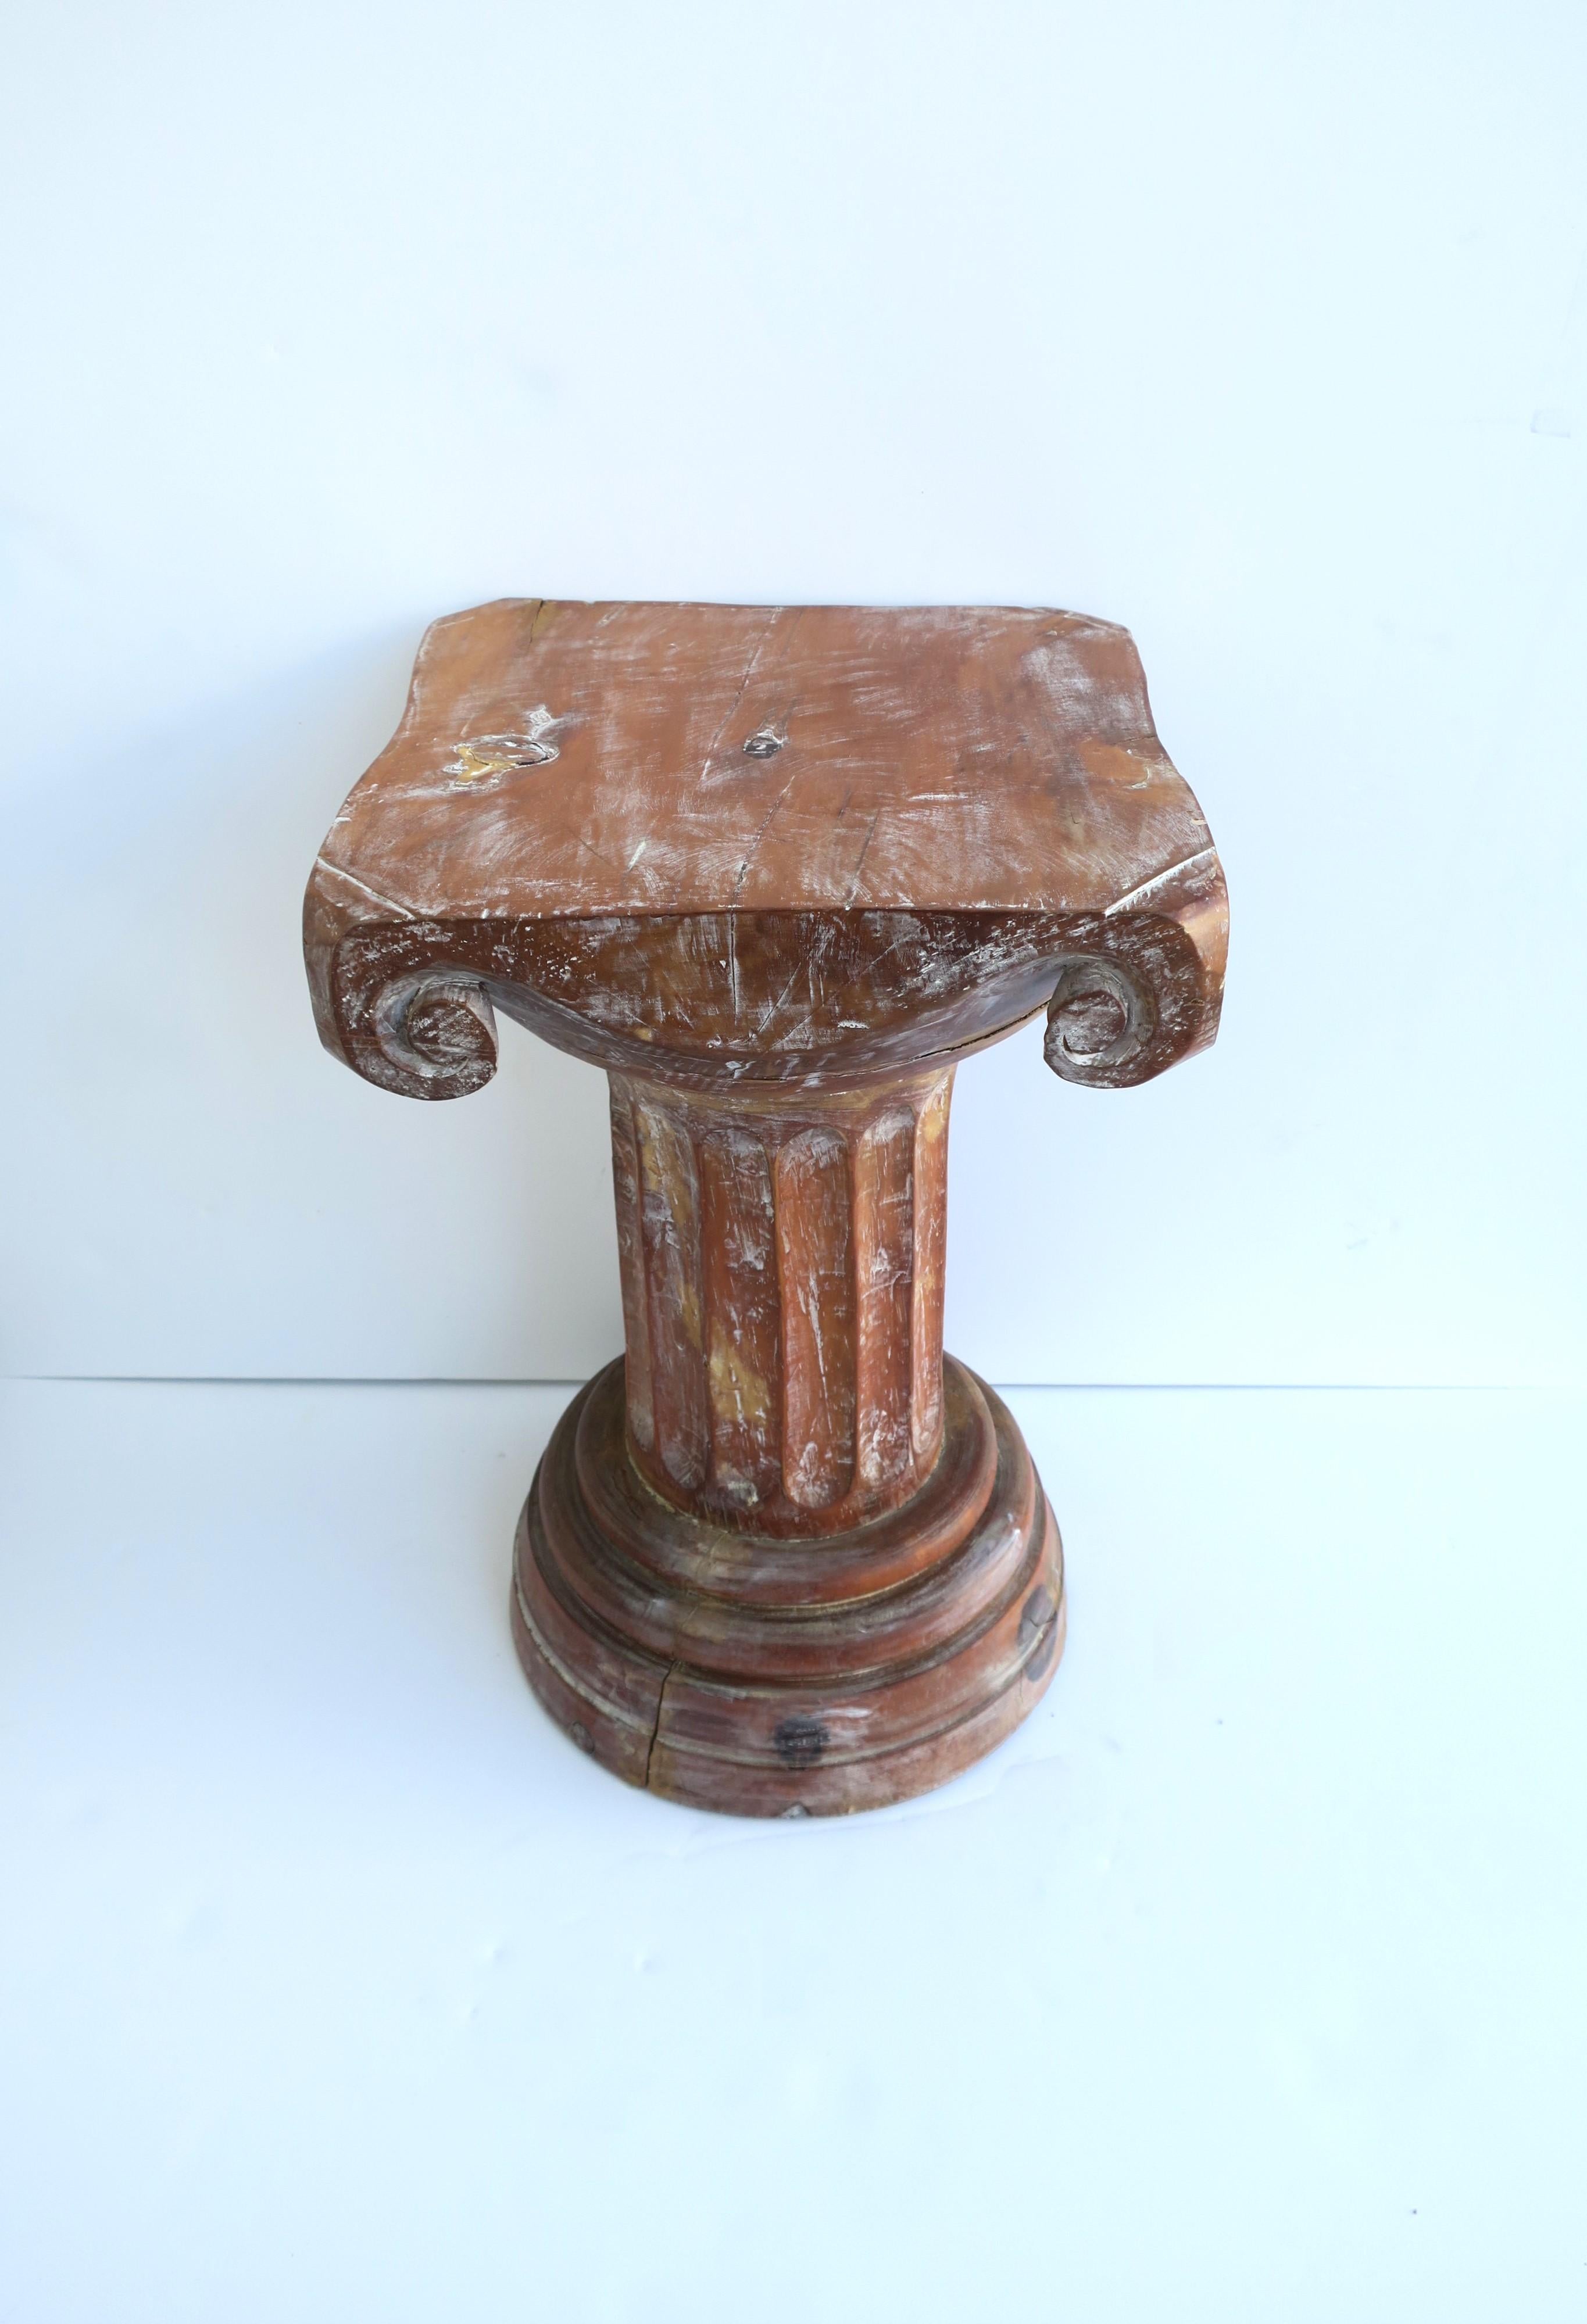 Wood Column Pedestal Table Neoclassical for Sculpture or Cocktail For Sale 4